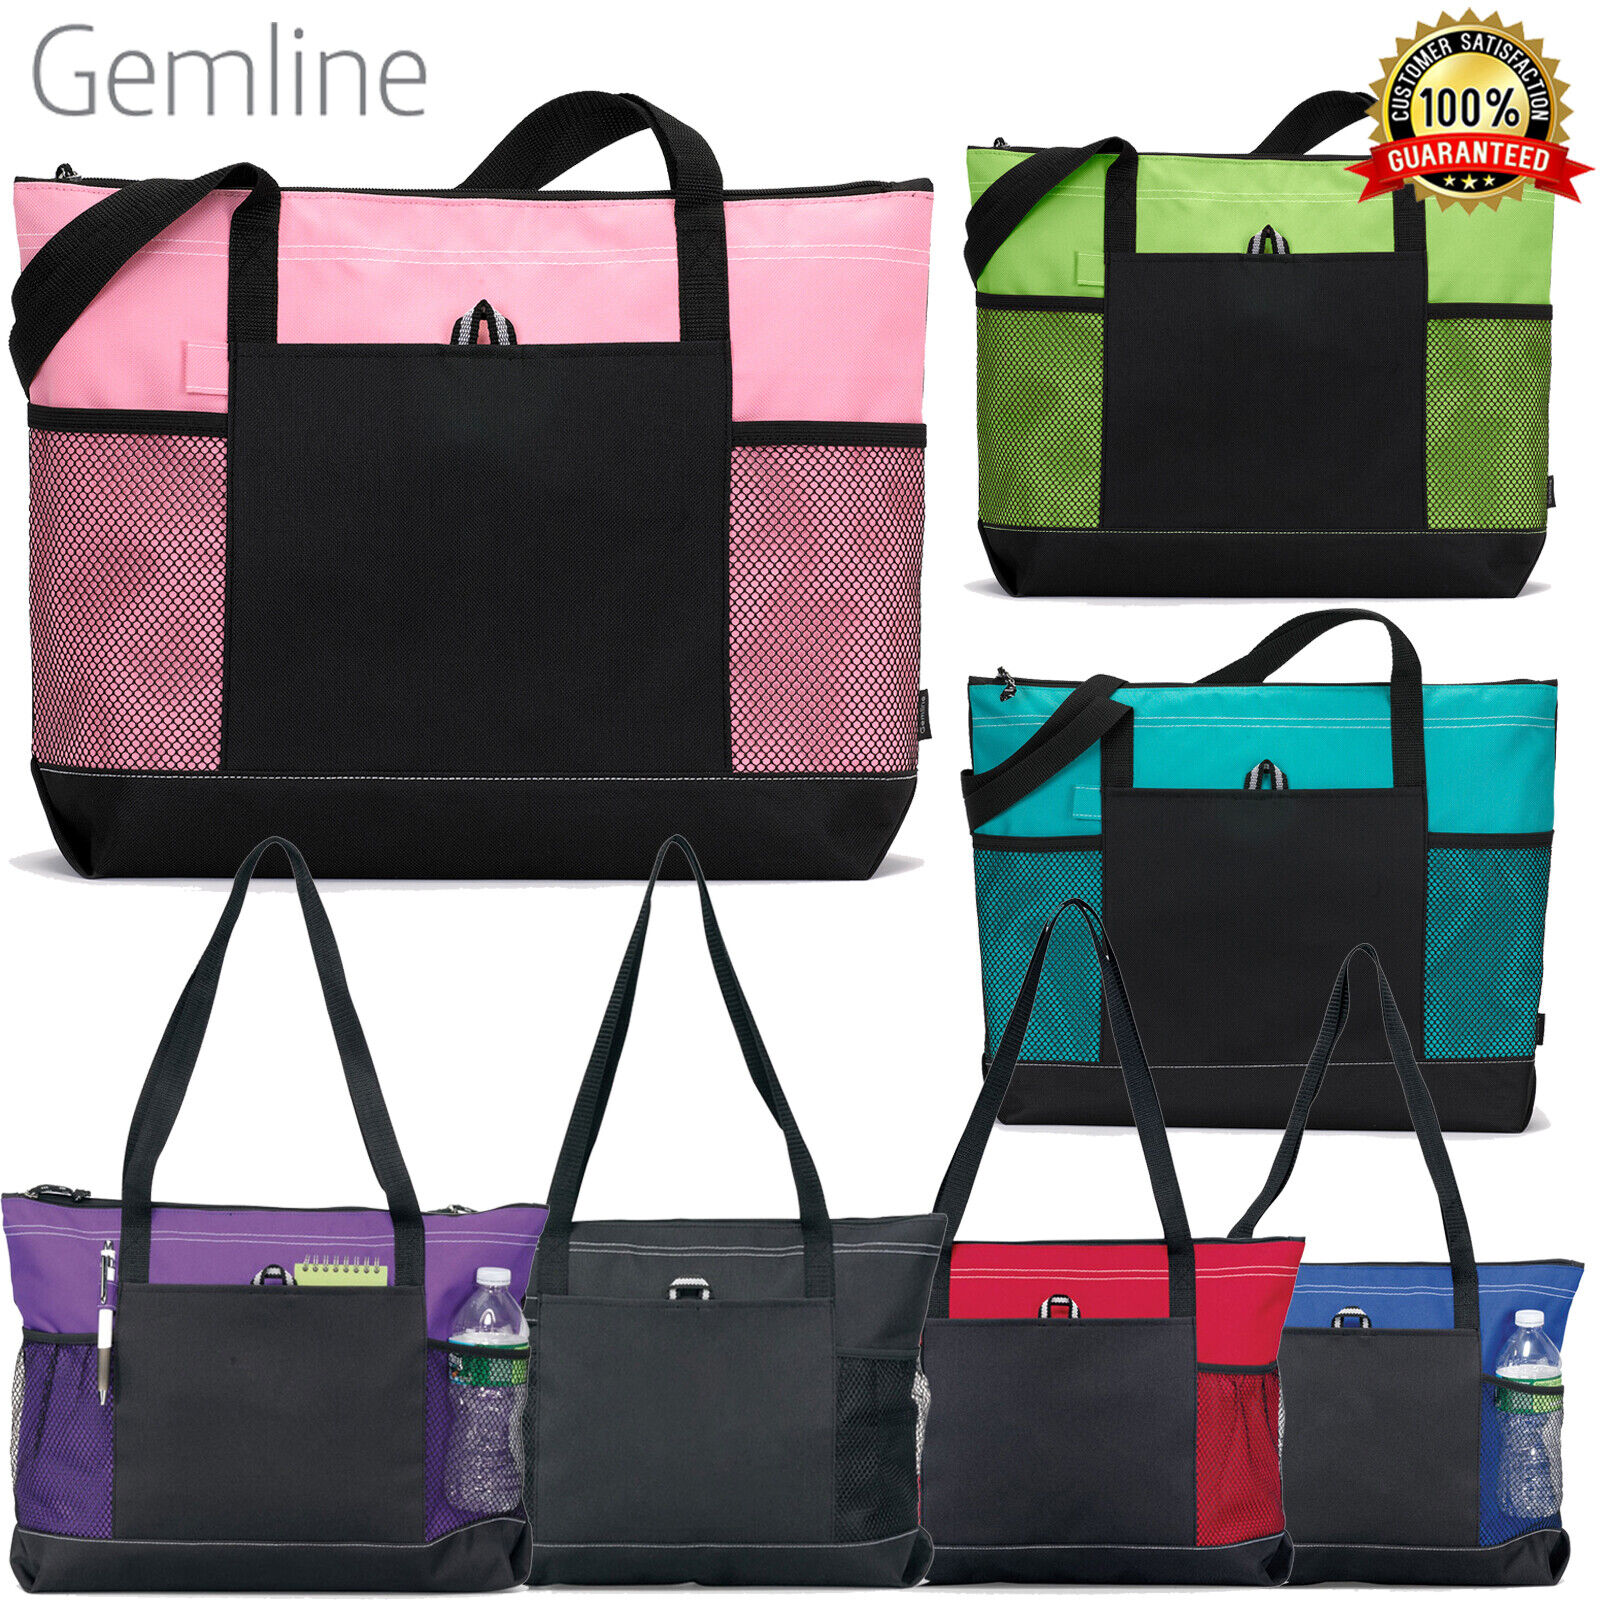 Gemline Select Zippered Tote Polyester 1100 Front Pocket With Pen Loop OS